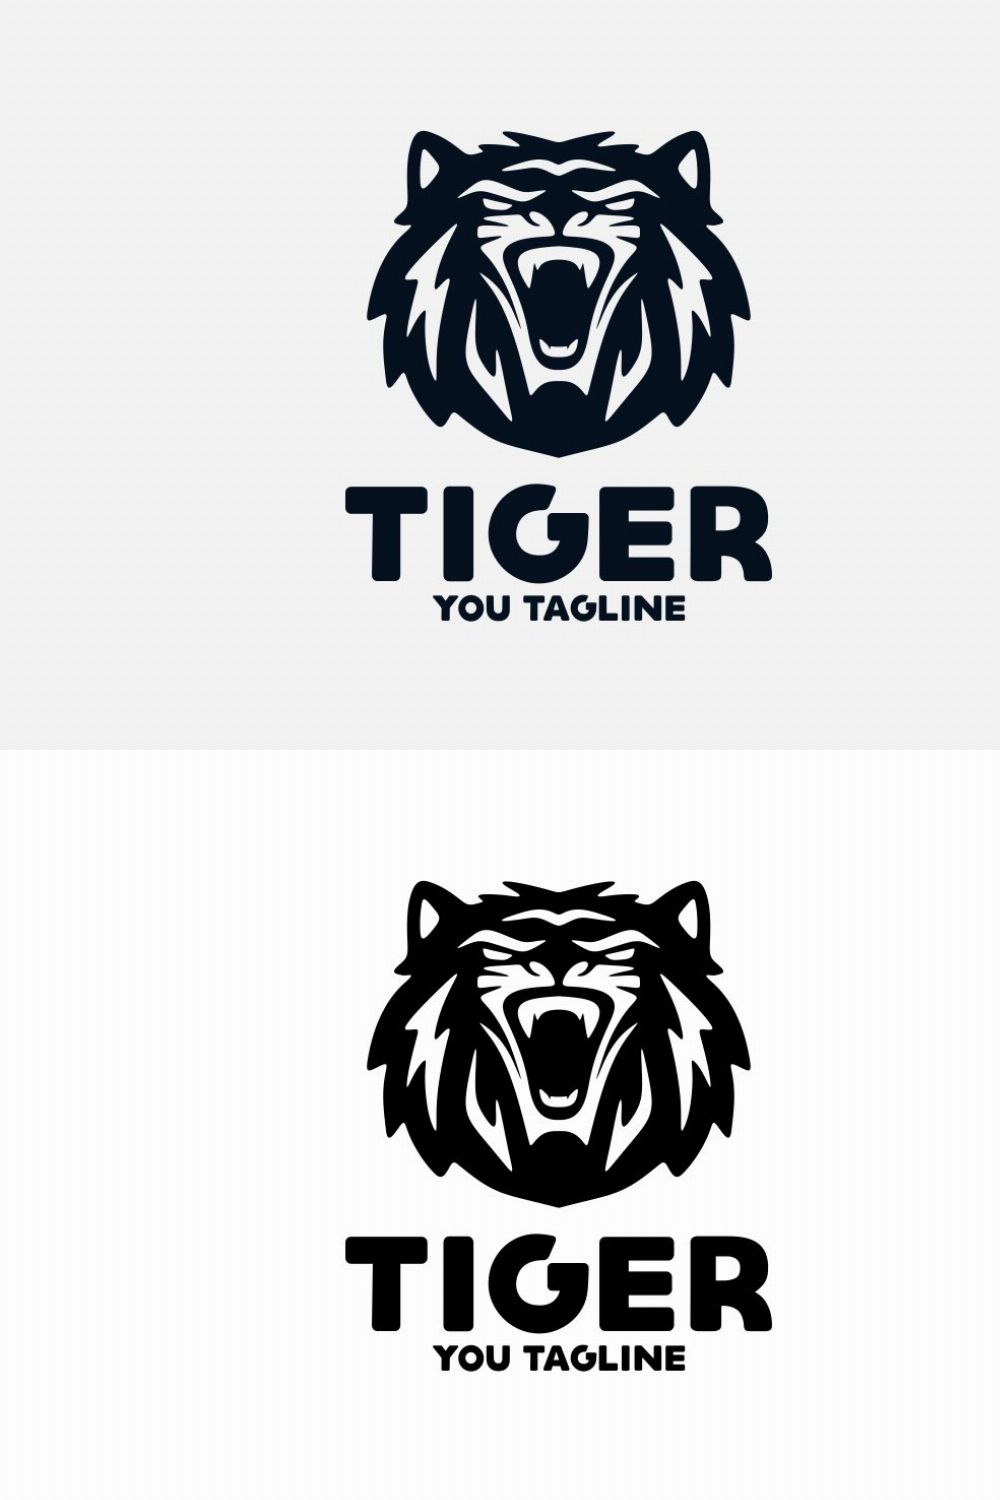 Tiger pinterest preview image.